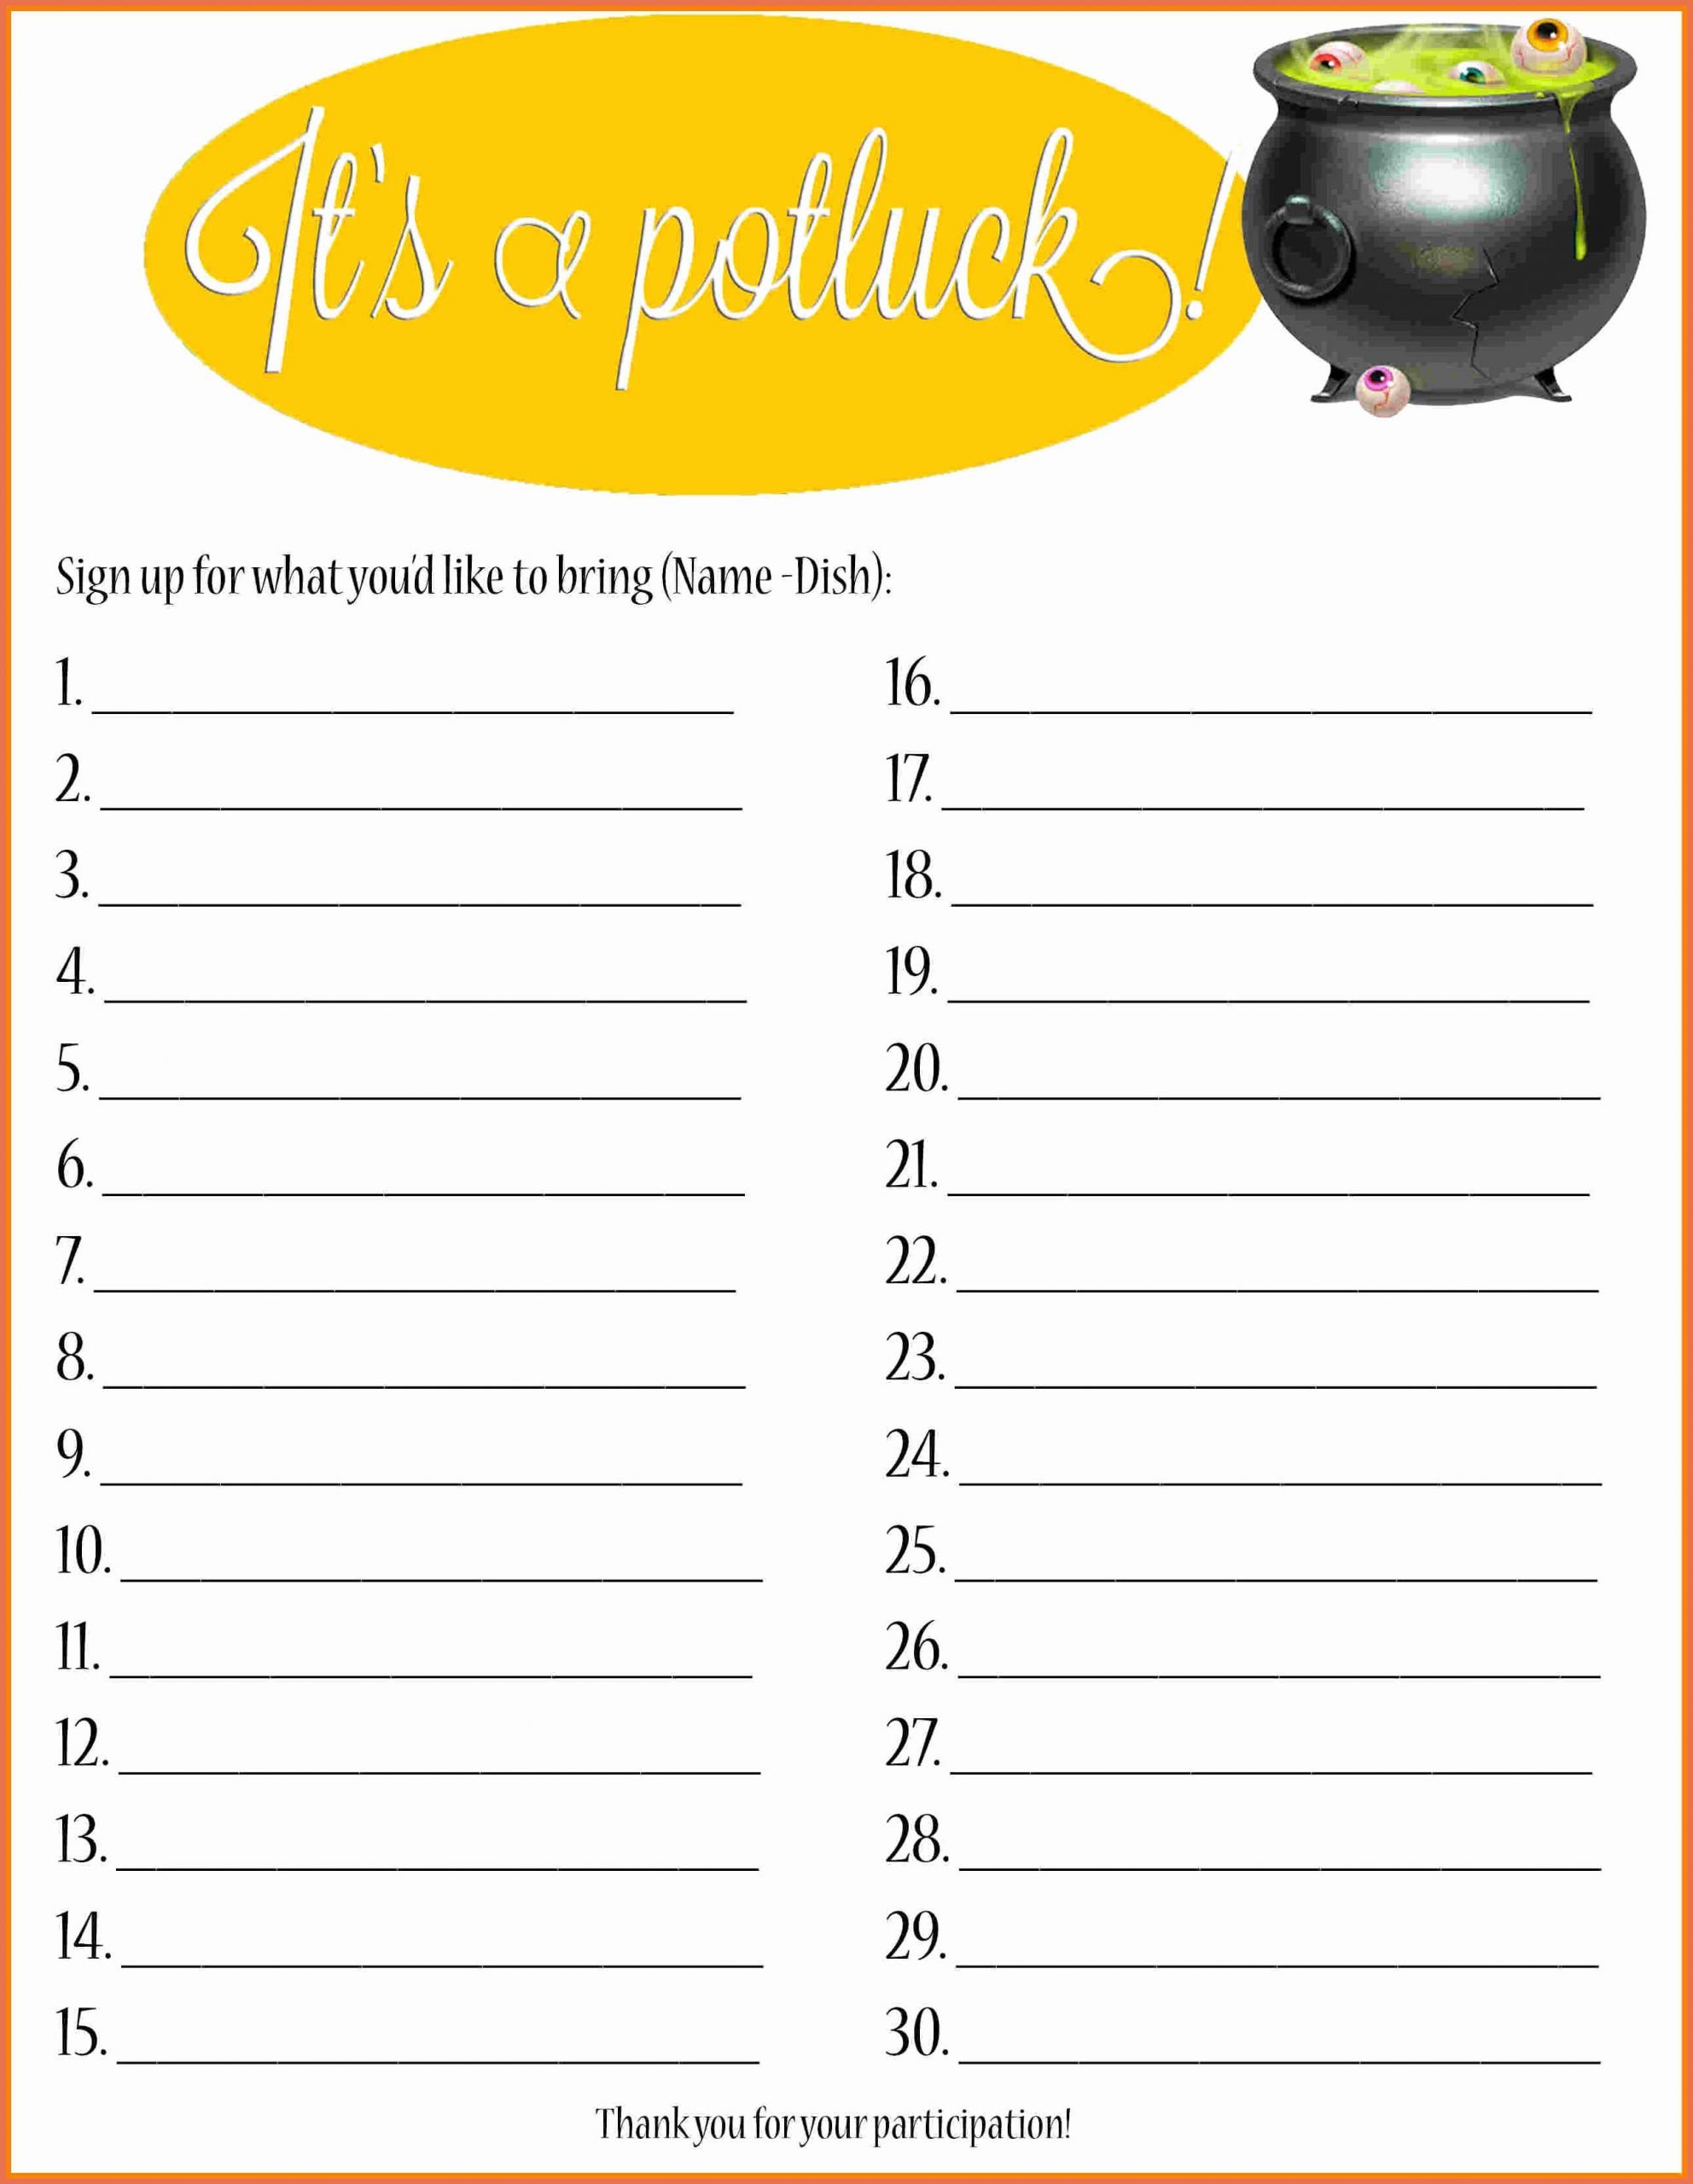 Potluck Signup Sheet Word Luxury Potluck Signup Sheet Template Word